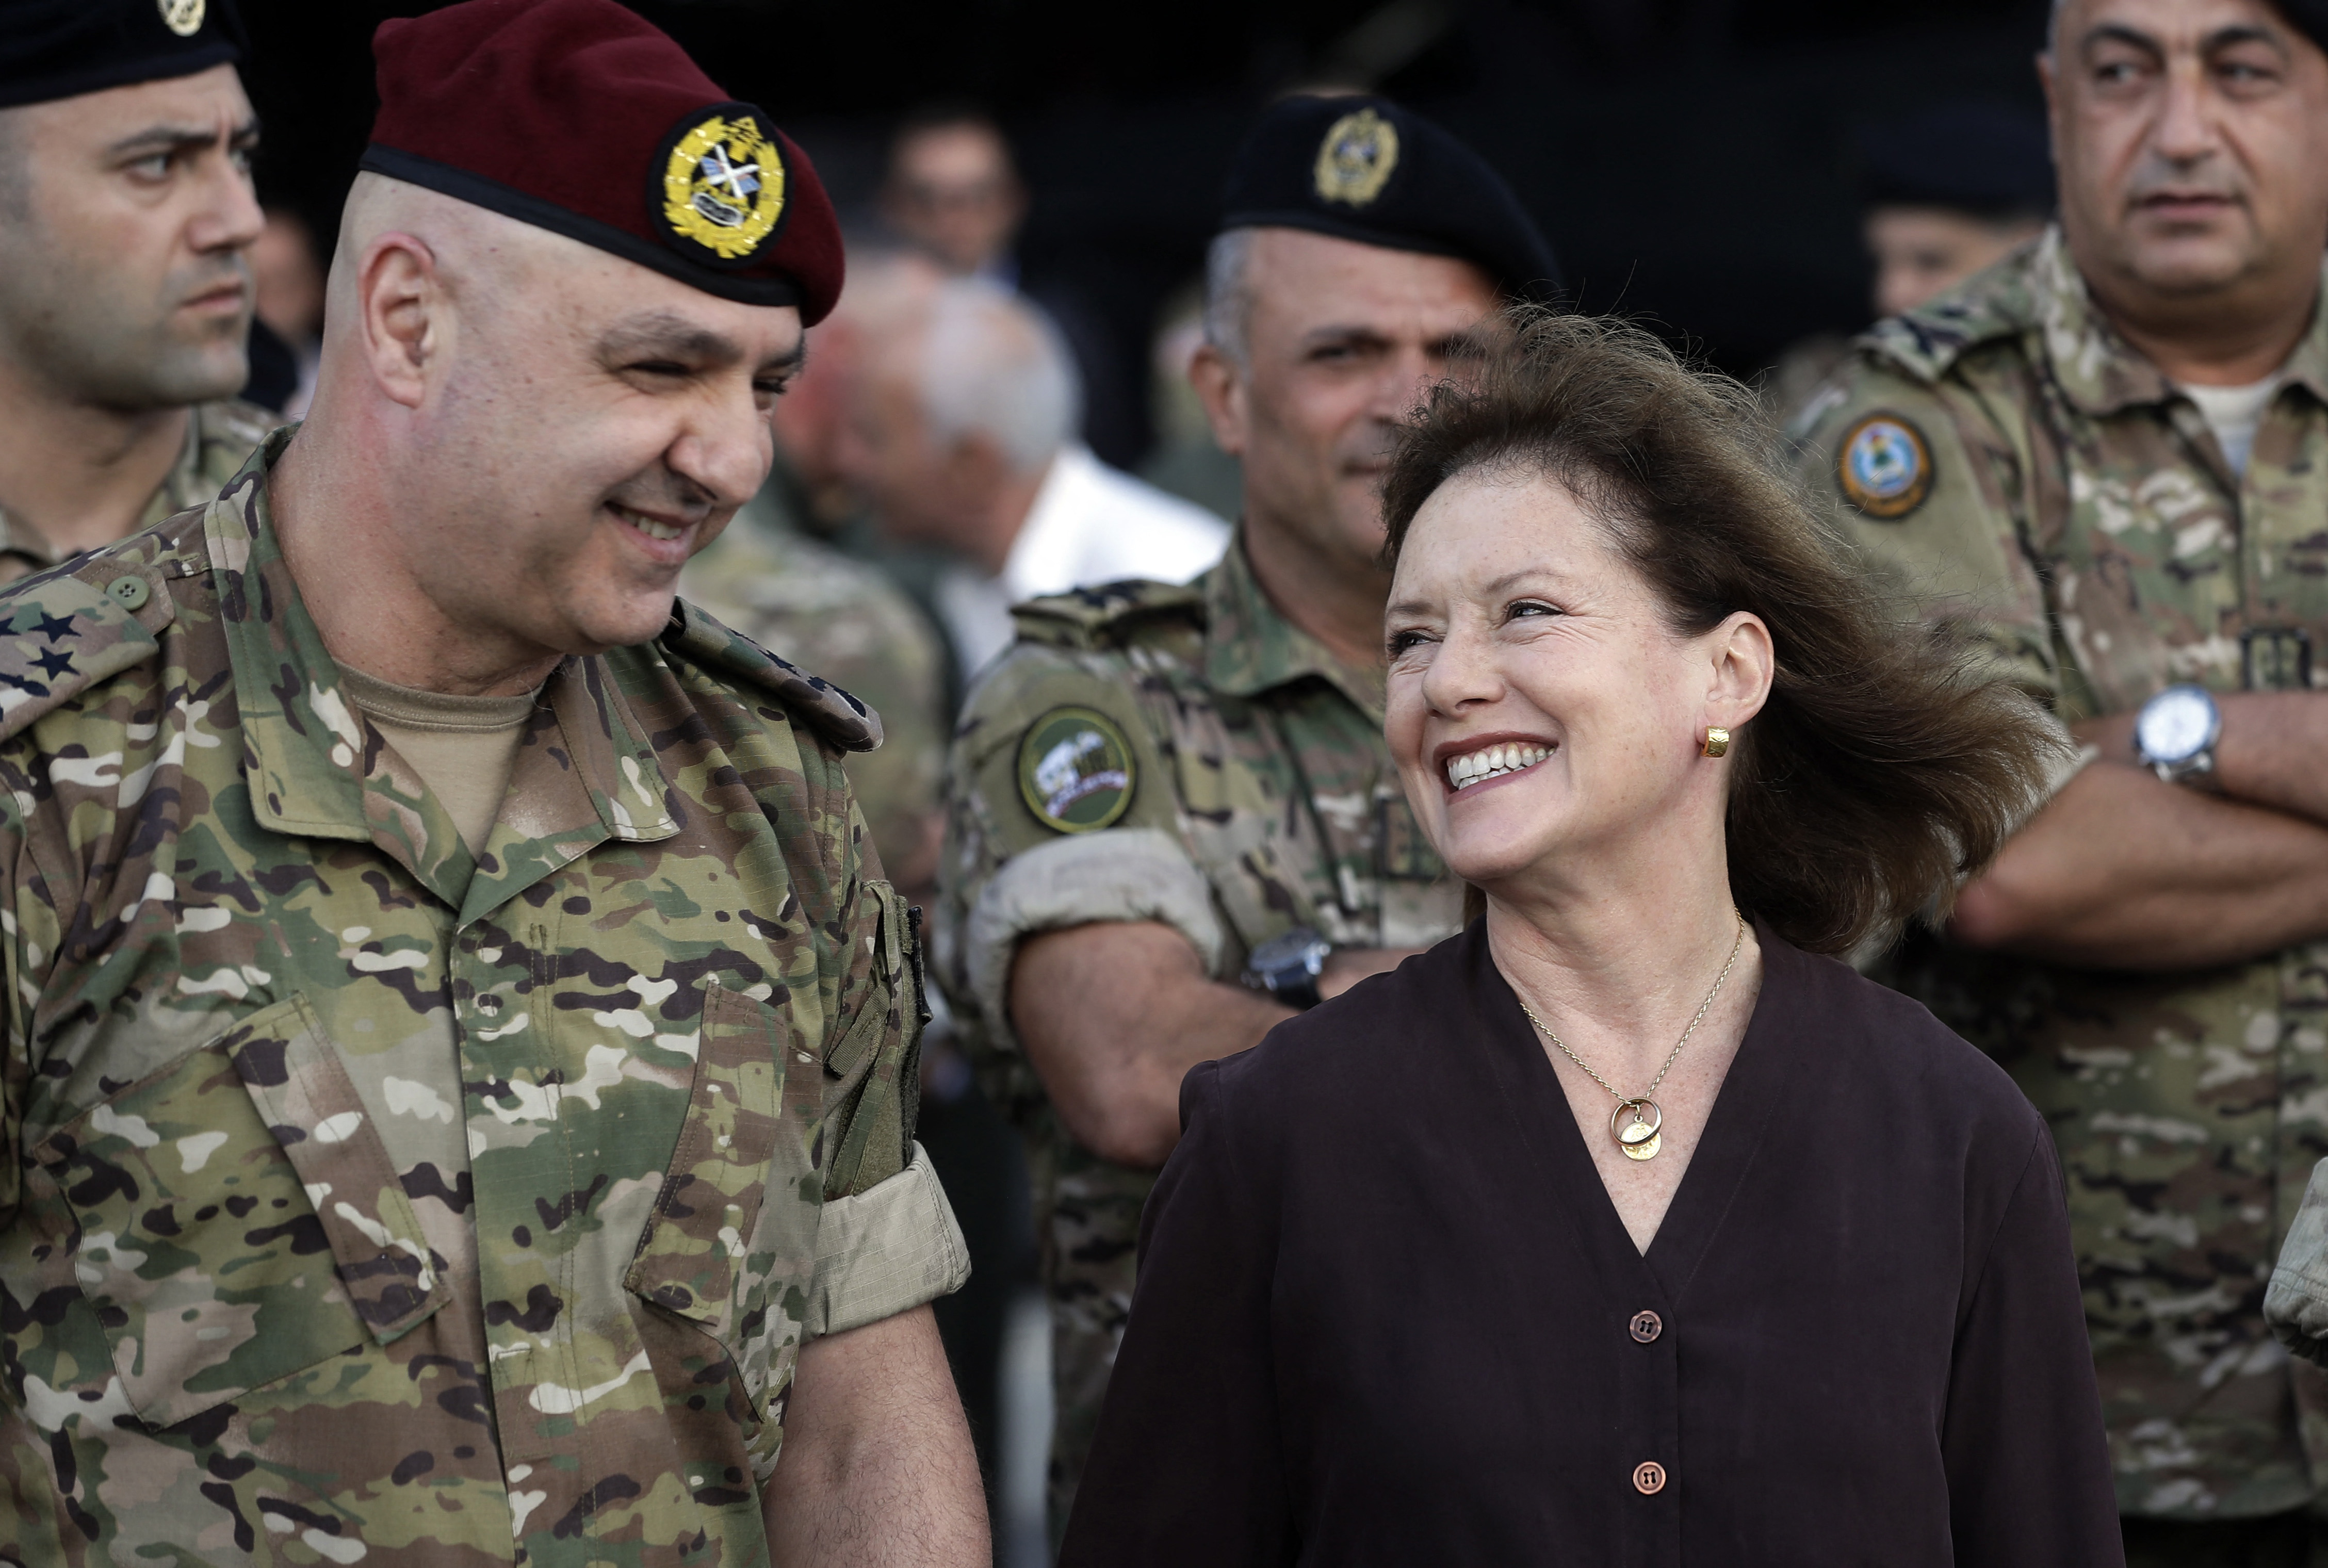 Elizabeth Richards (R), the US Ambassador to Lebanon, speaks with Lebanese Army Chief of Staff General Joseph Aoun in 2018 (AFP)